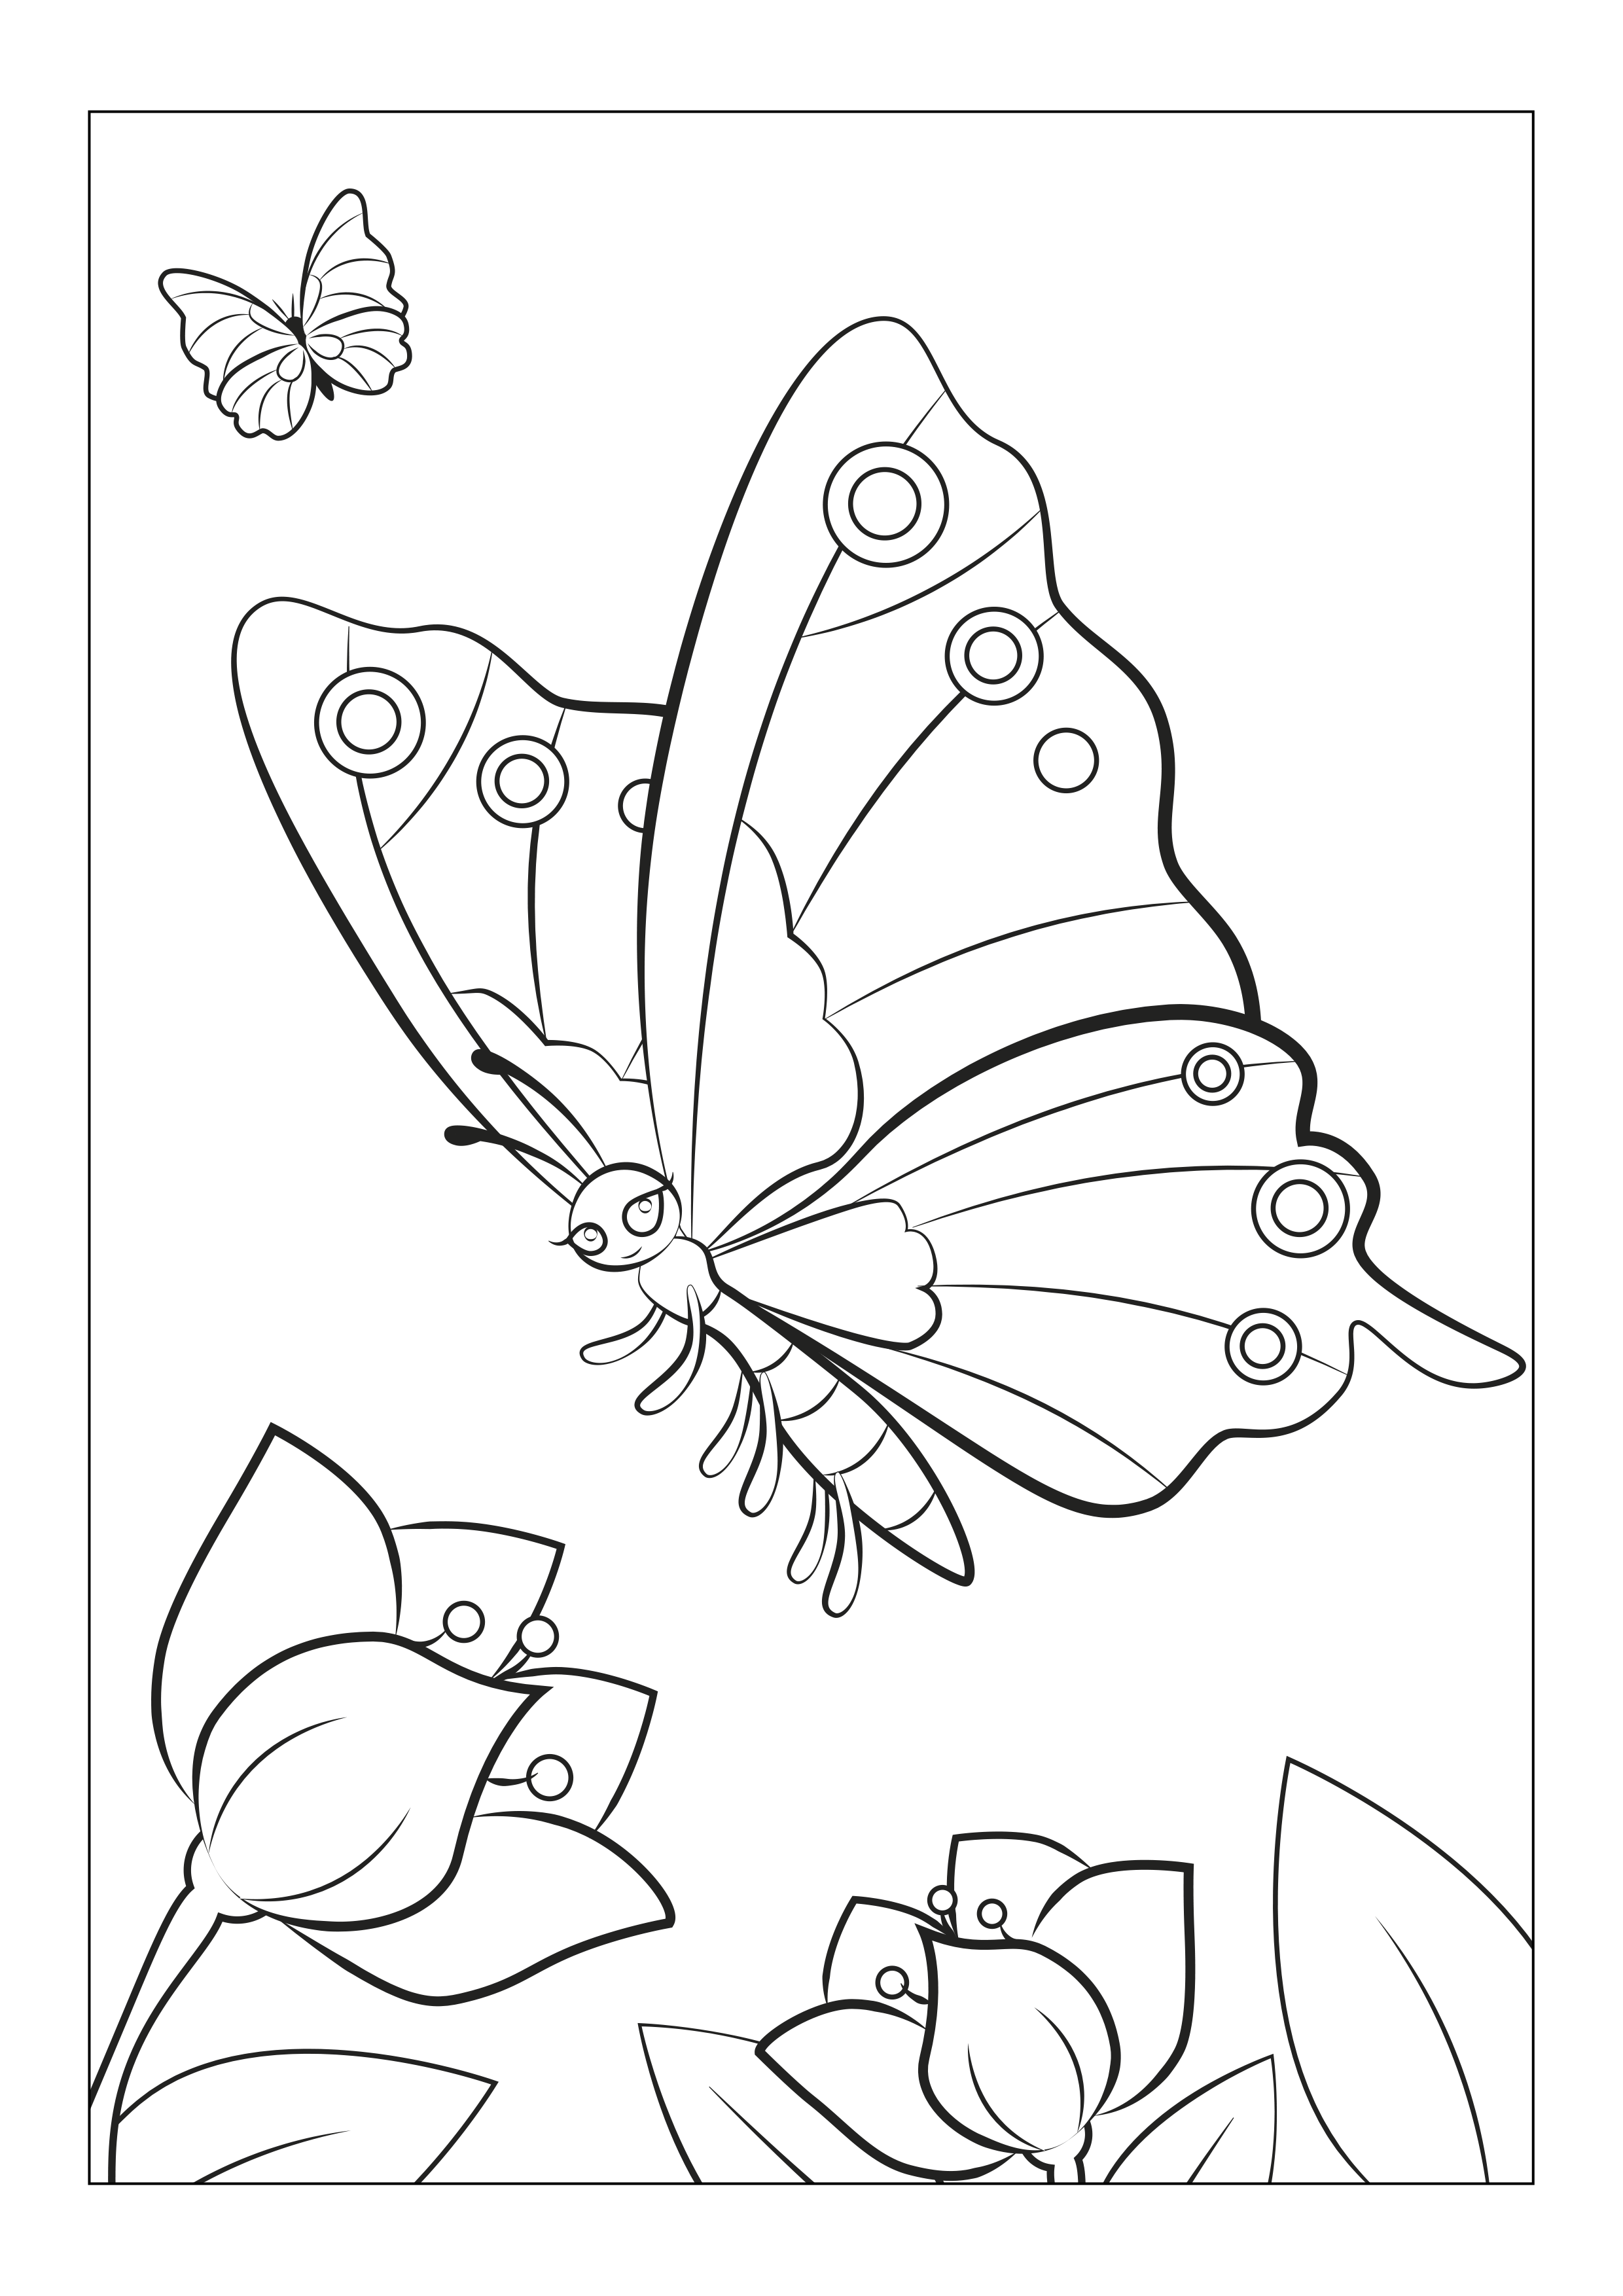 Free Online Coloring Pages With Super Cool Bugs   Best Online Gift ...